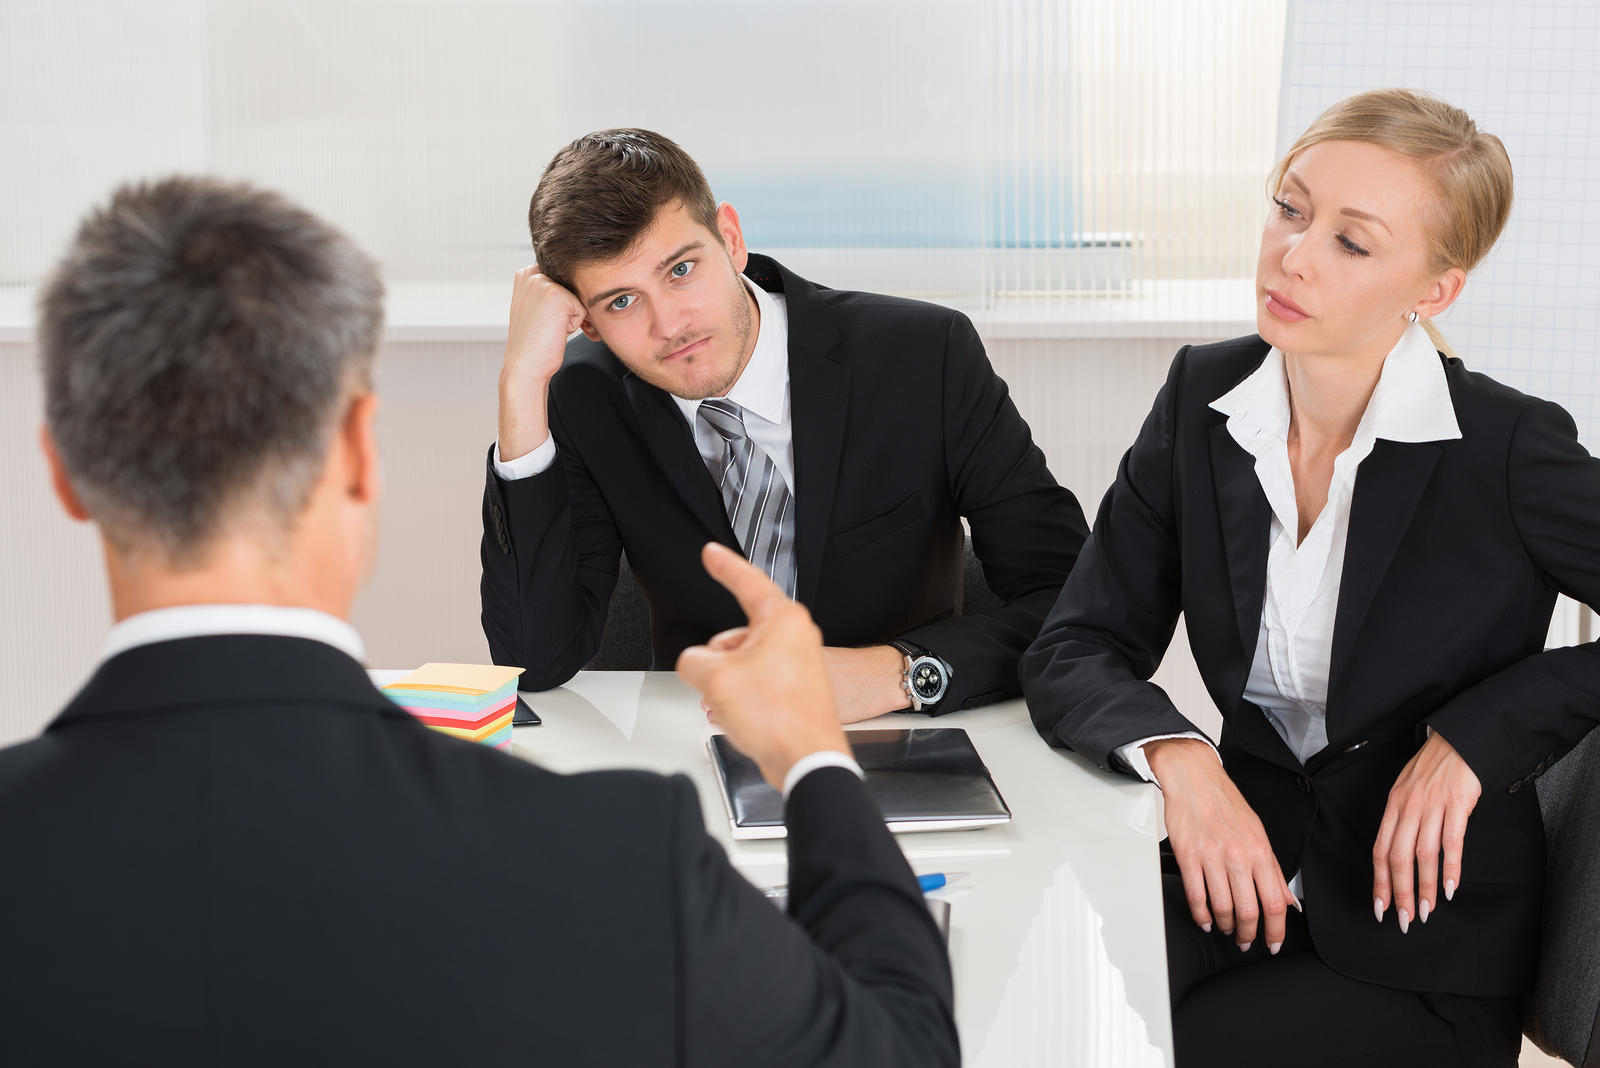 Top Tips for Managers Dealing with Conflict in the Workplace